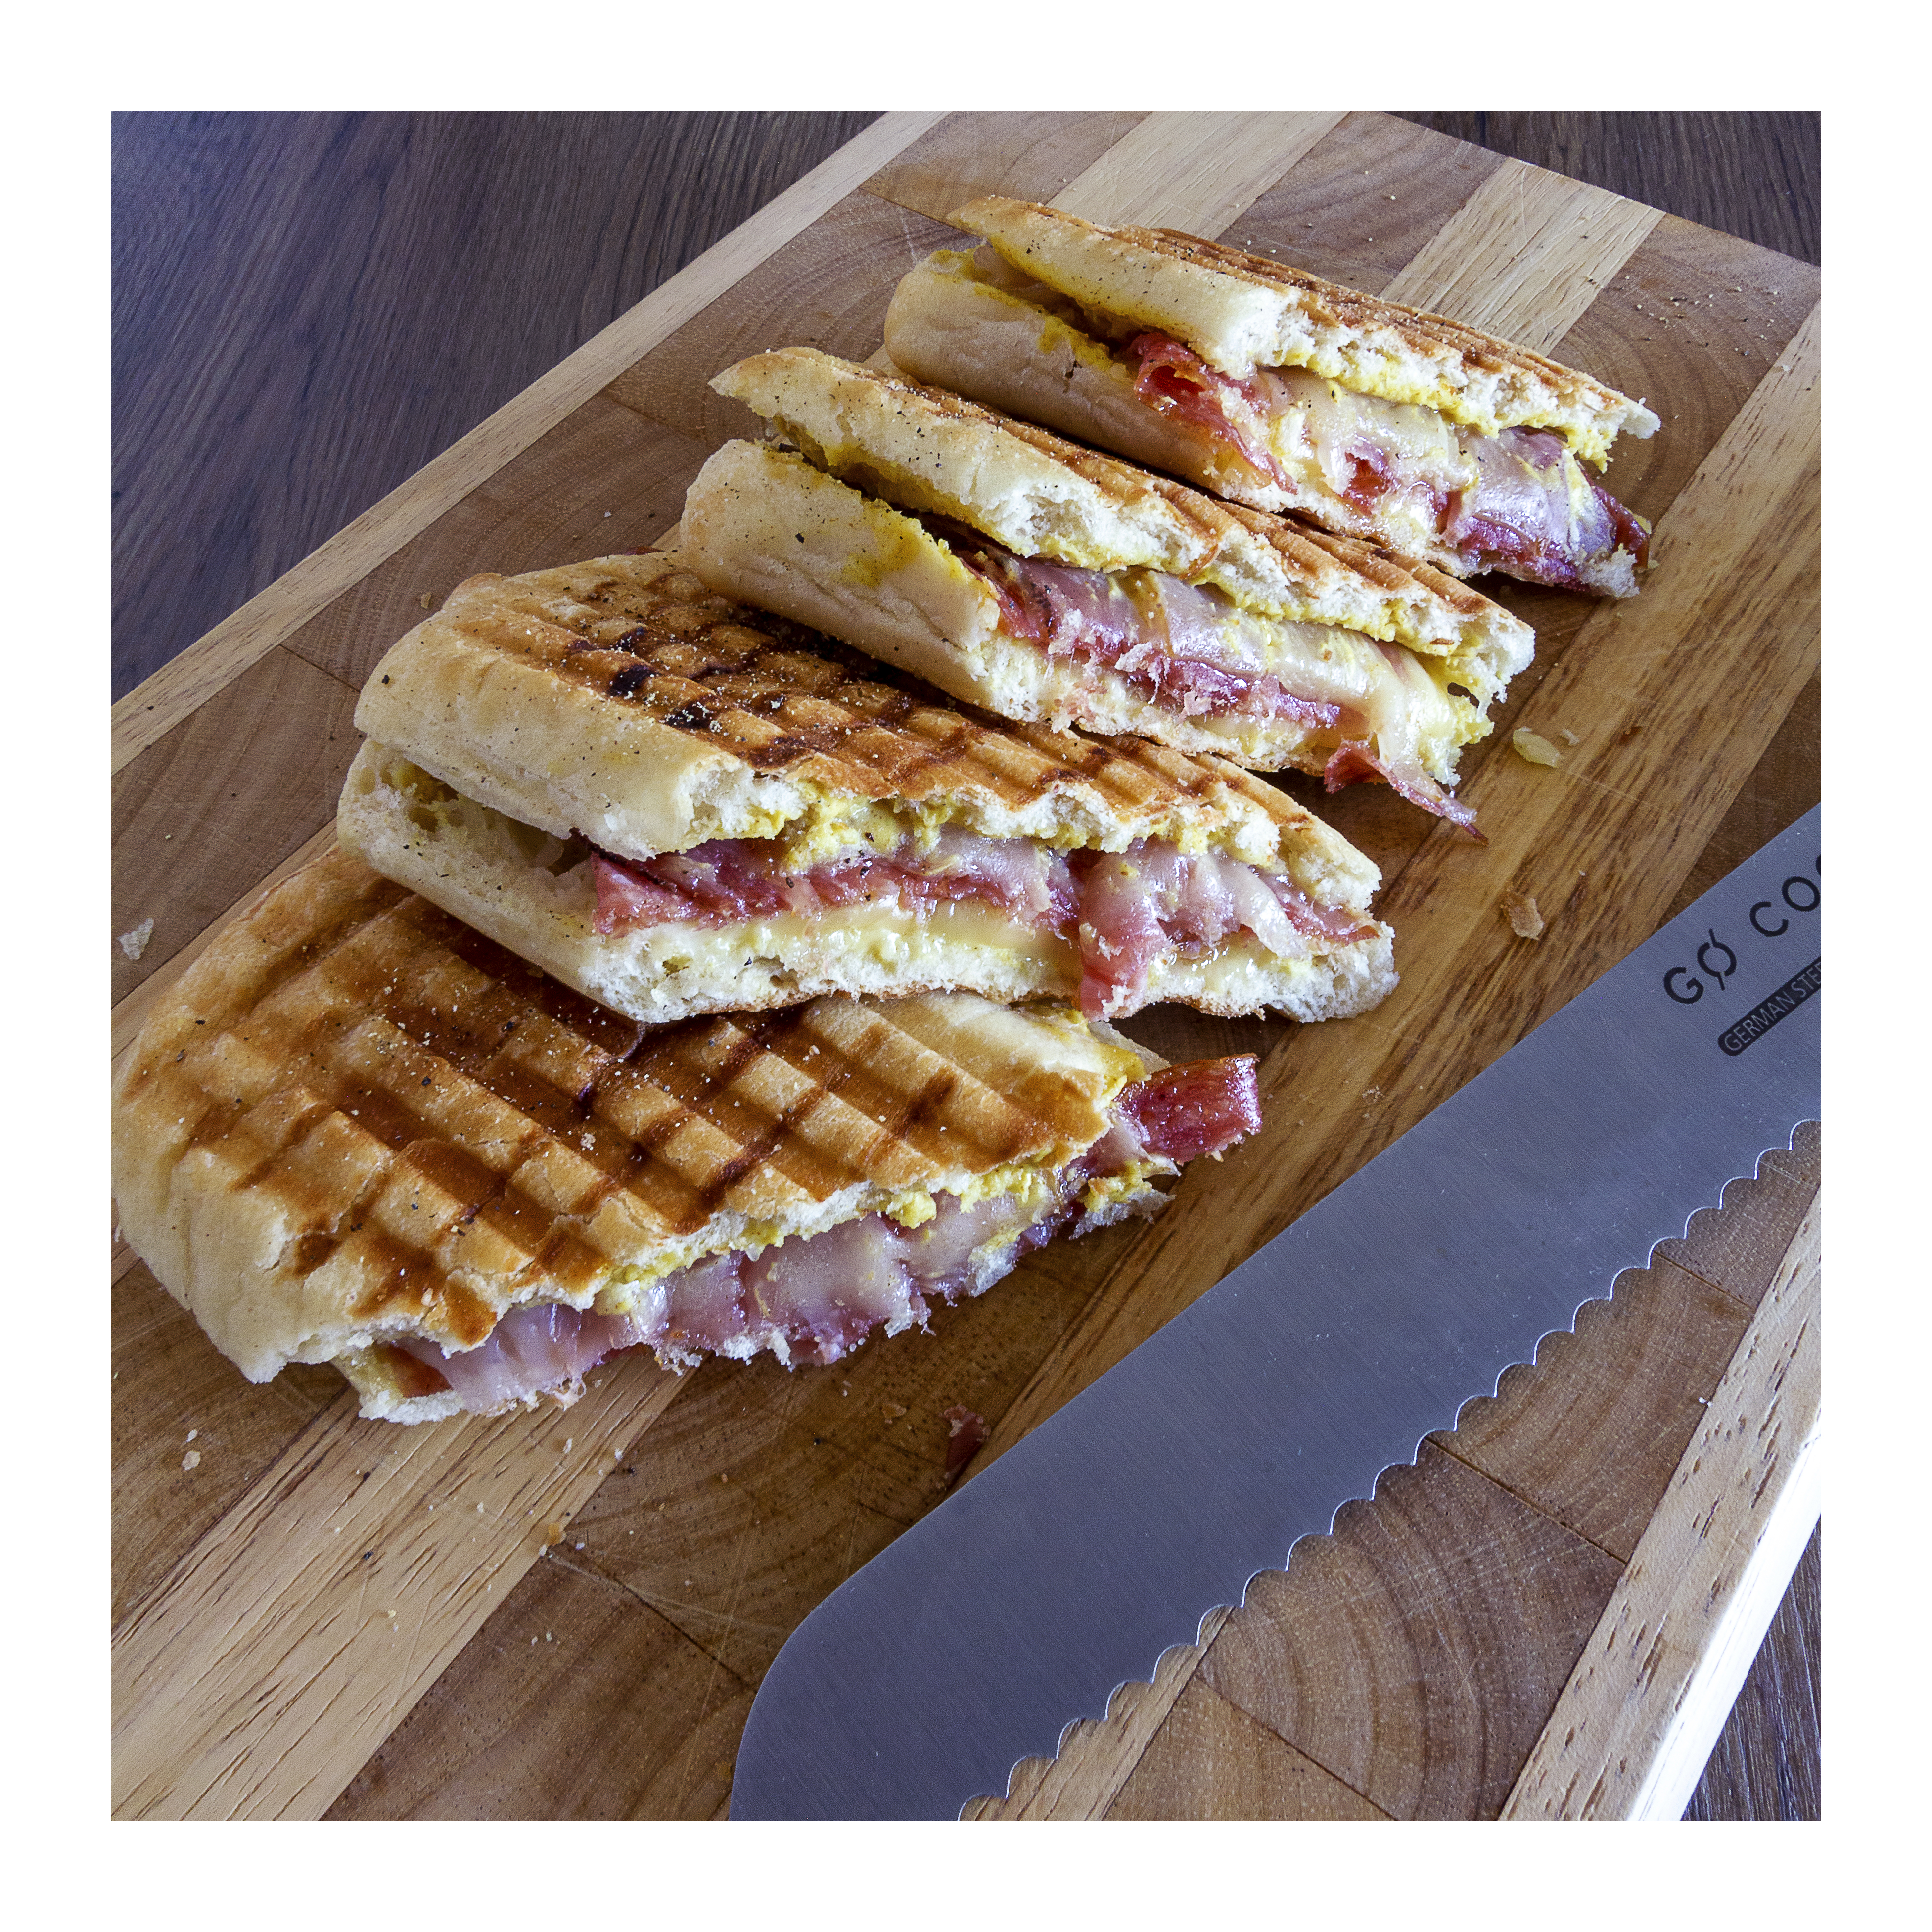 General 3906x3906 panini food food crumbs lunch meat cheese toasts cutting board wooden surface closeup photography spices table knife bread